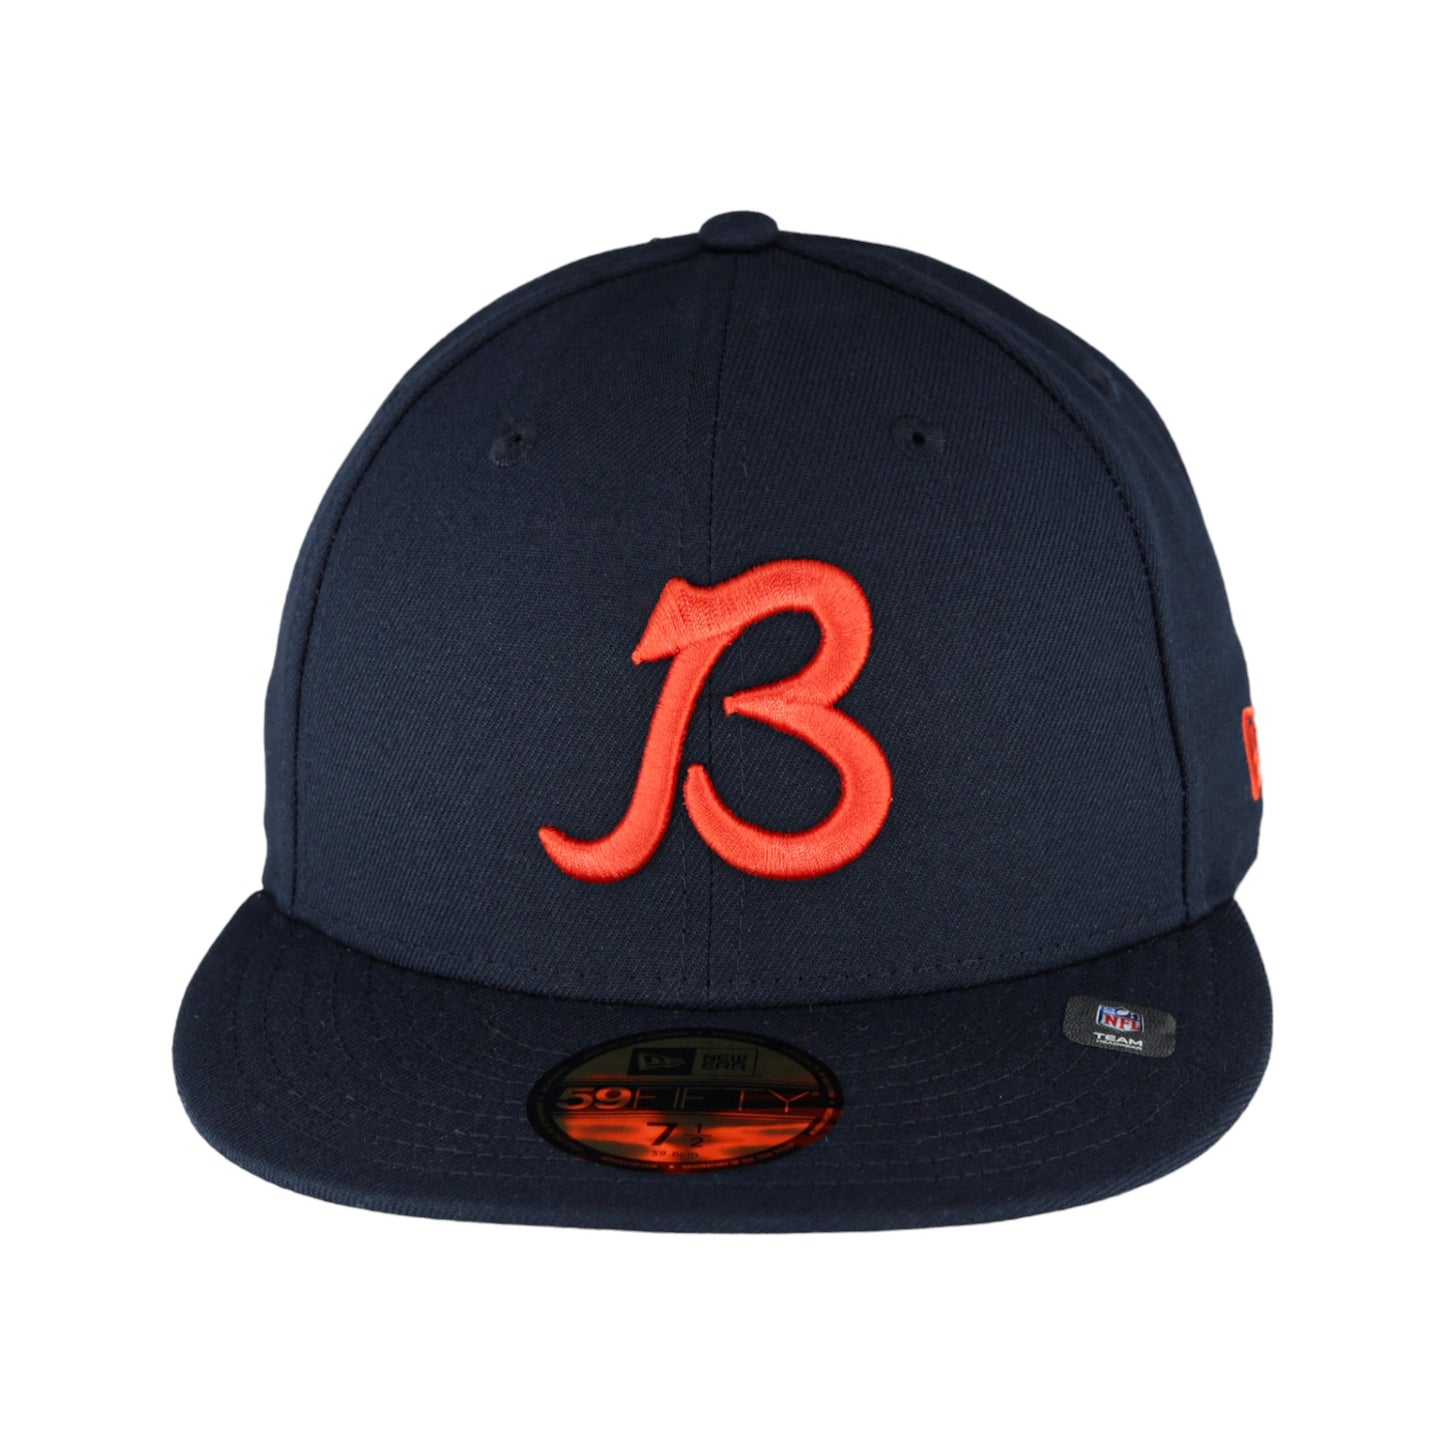 Chicago Bears New Era 59FIFTY Navy B Fitted Hat